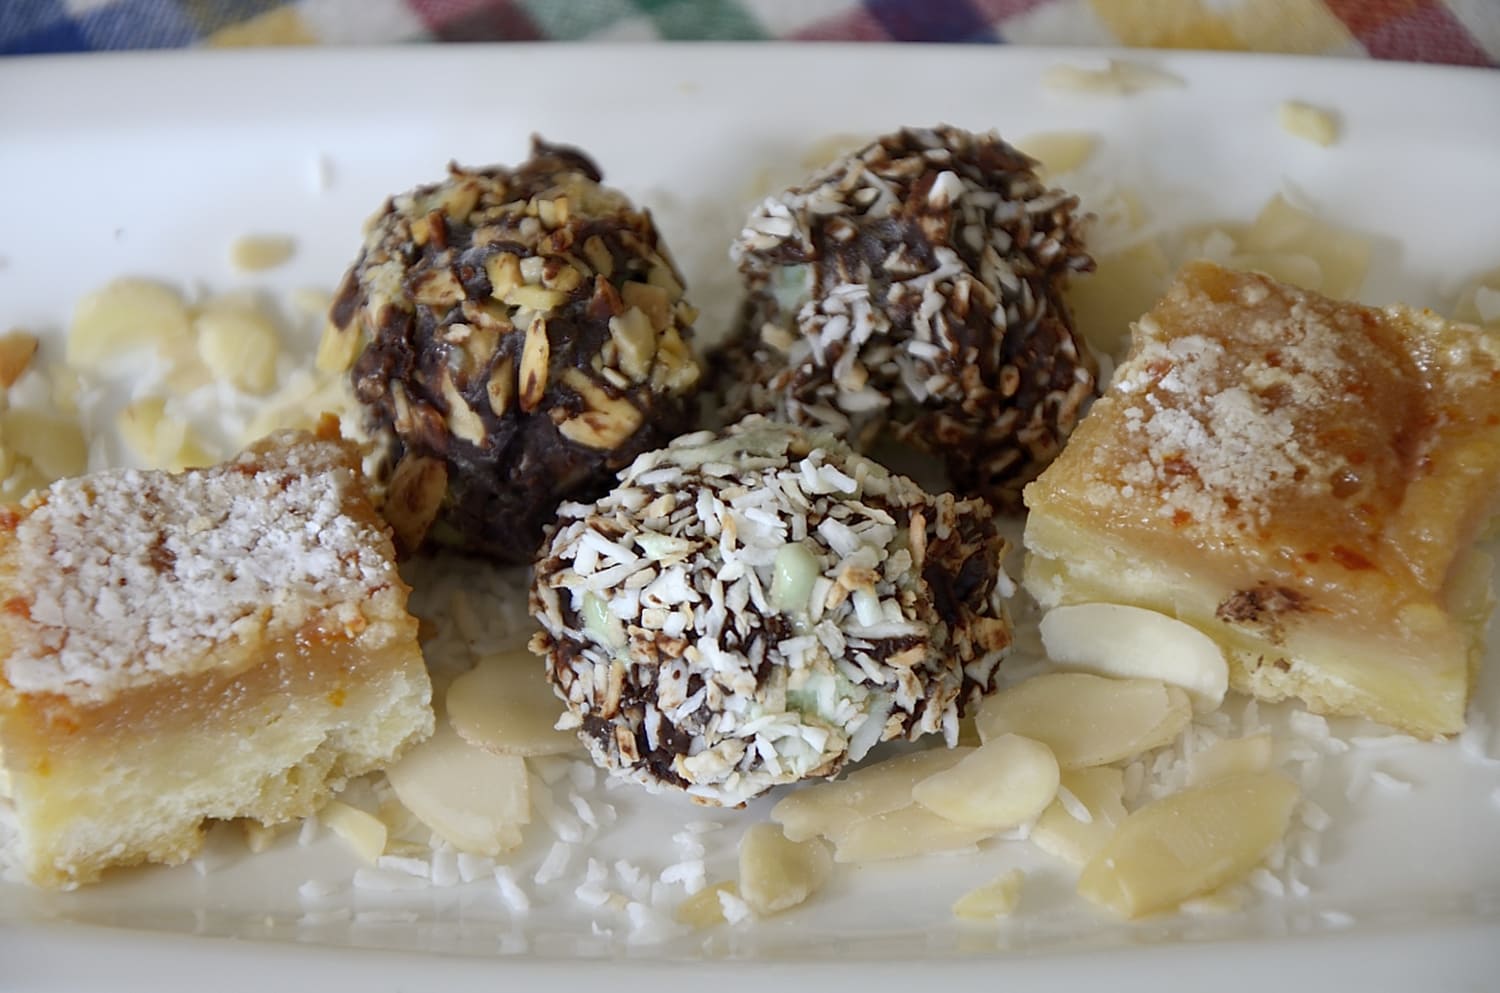 3 ice cream truffles coated in chocolate and toasted coconut and toasted almonds